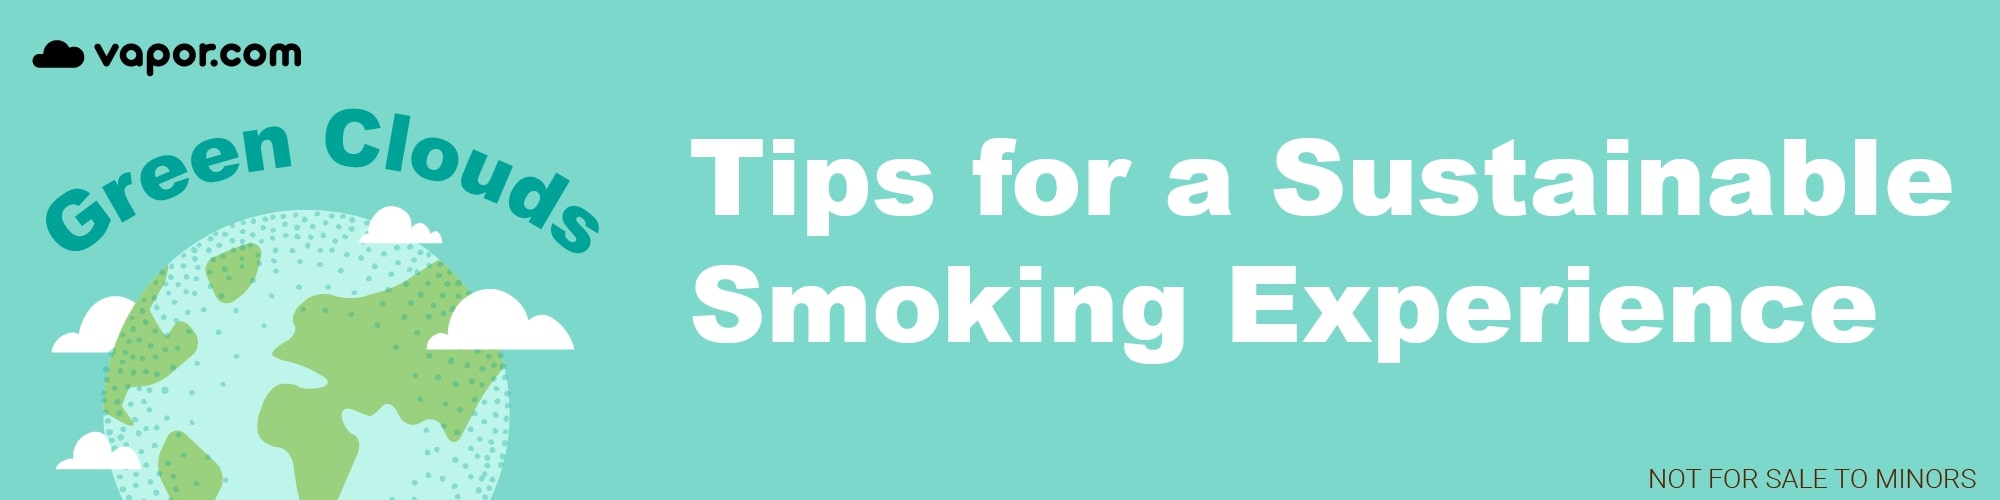 Green Smoking: Tips for a Sustainable Smoking Experience